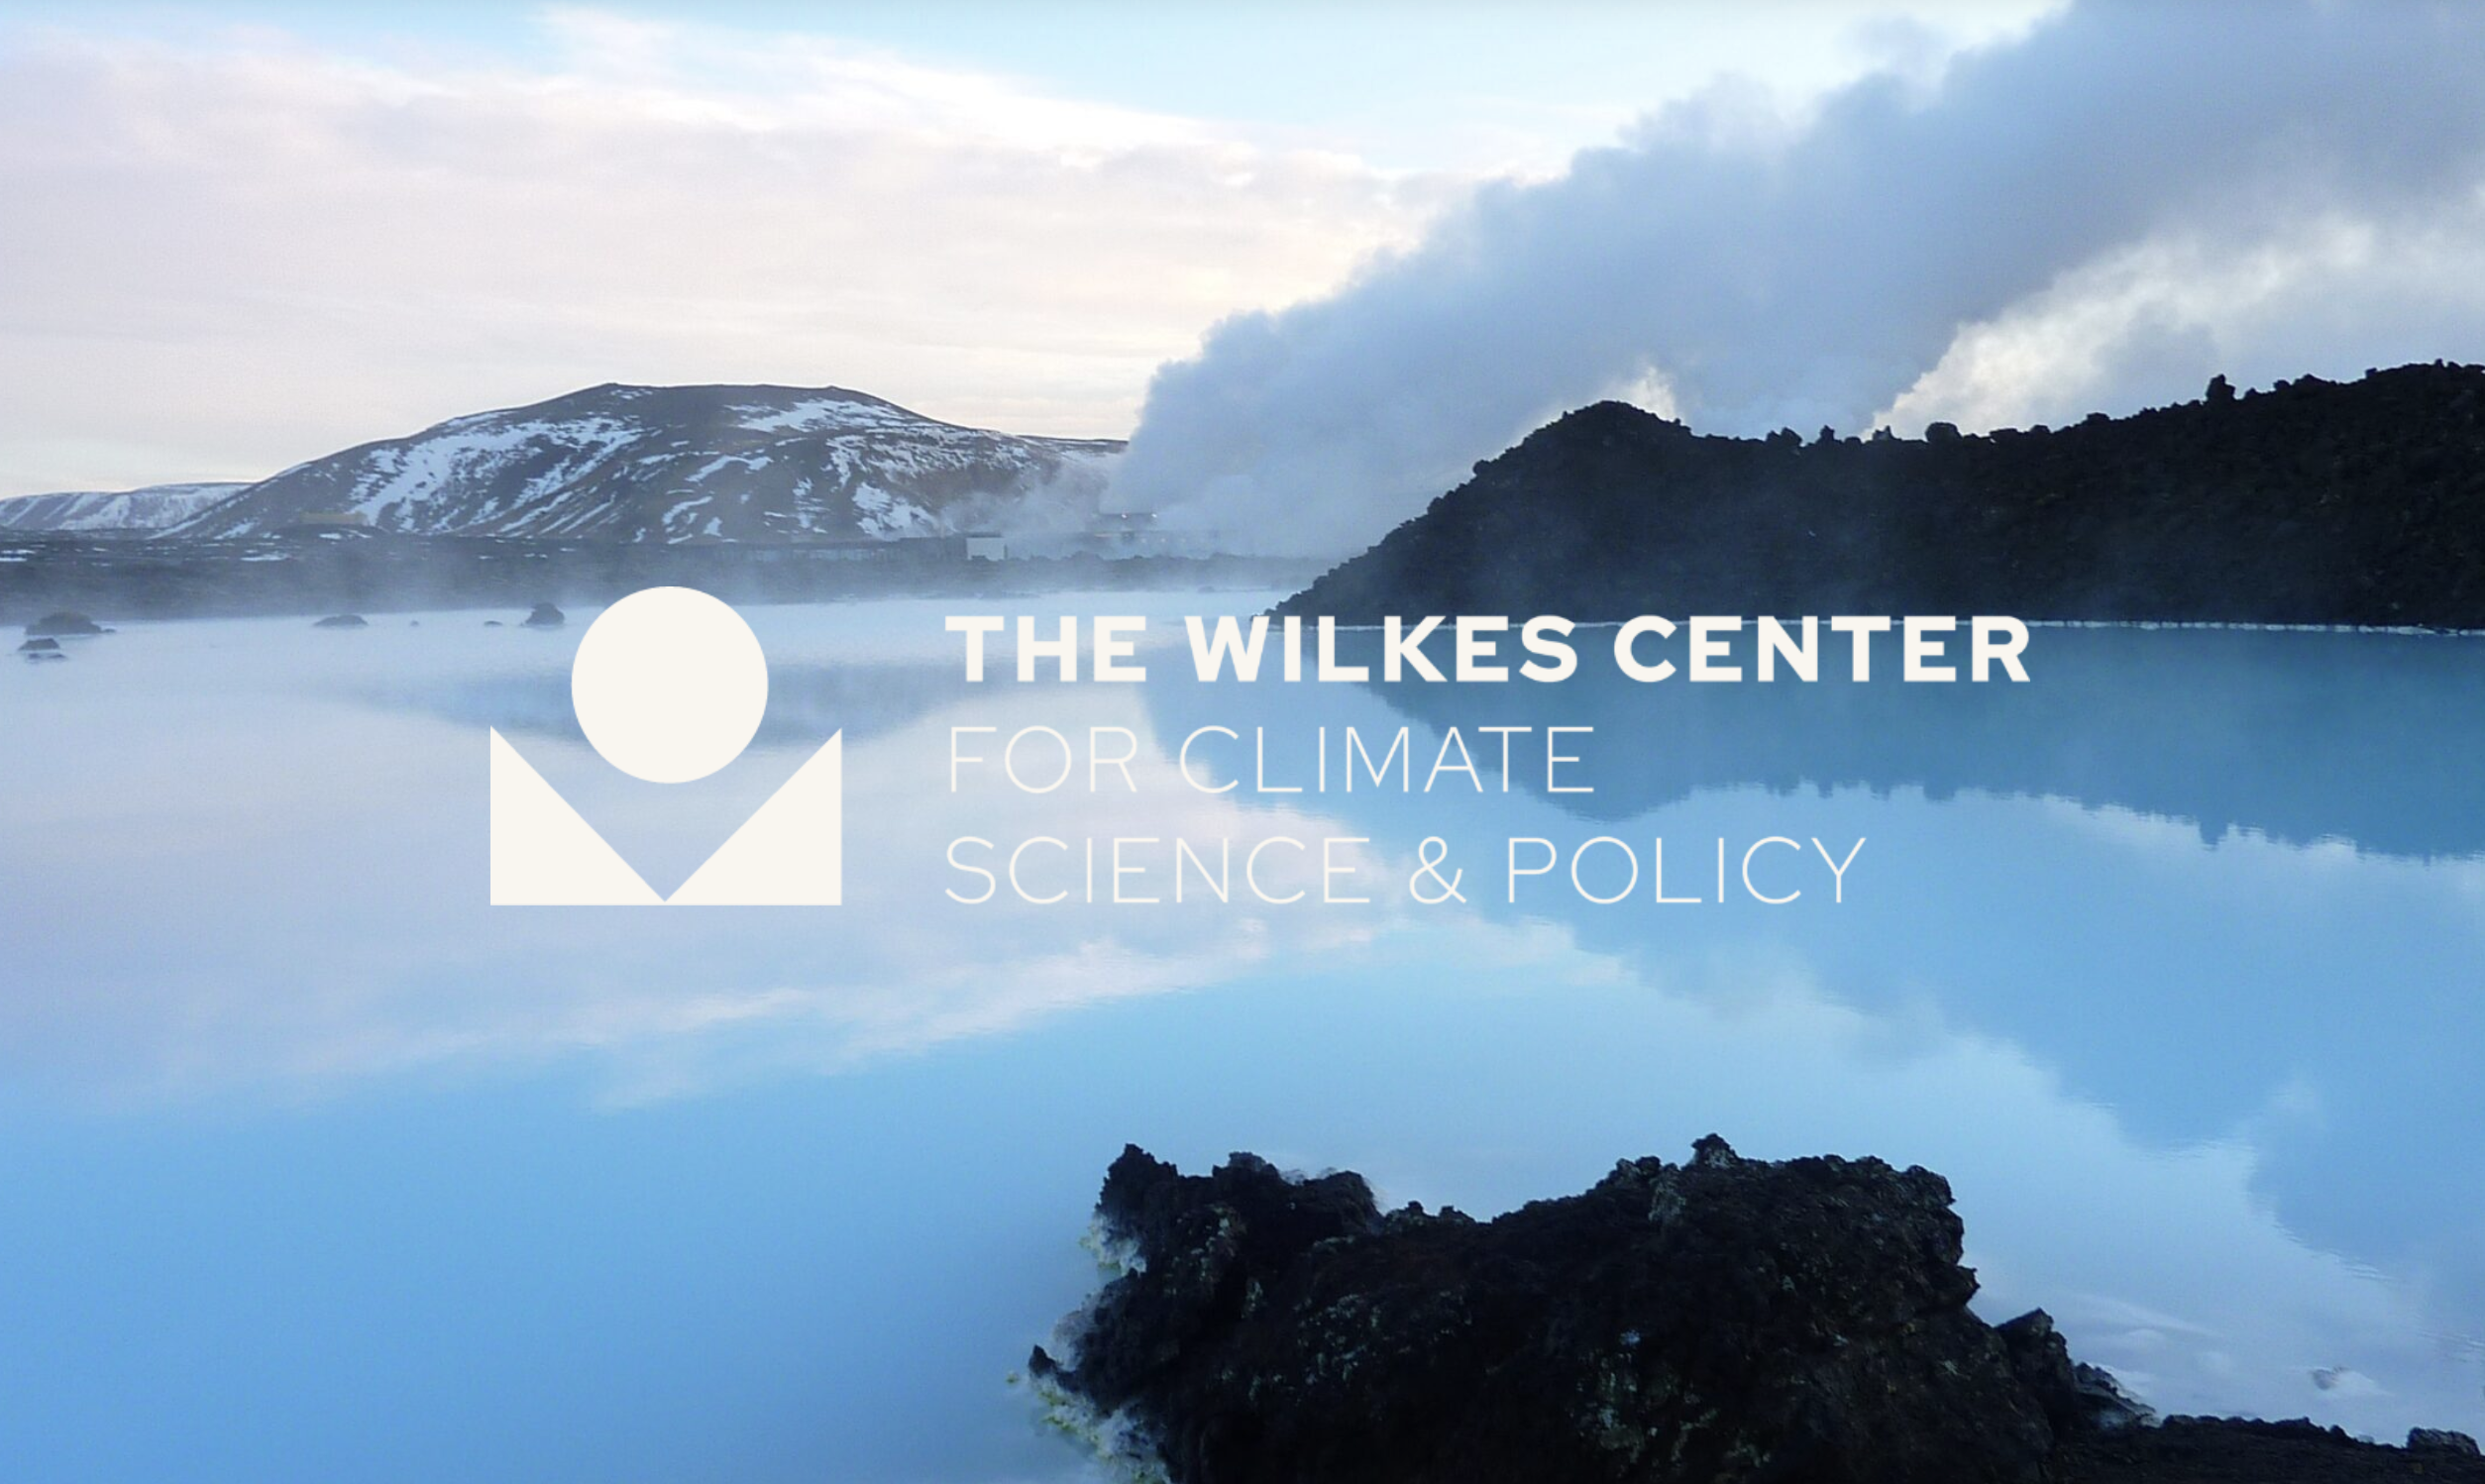 The Wilkes Center for Climate Science & Policy